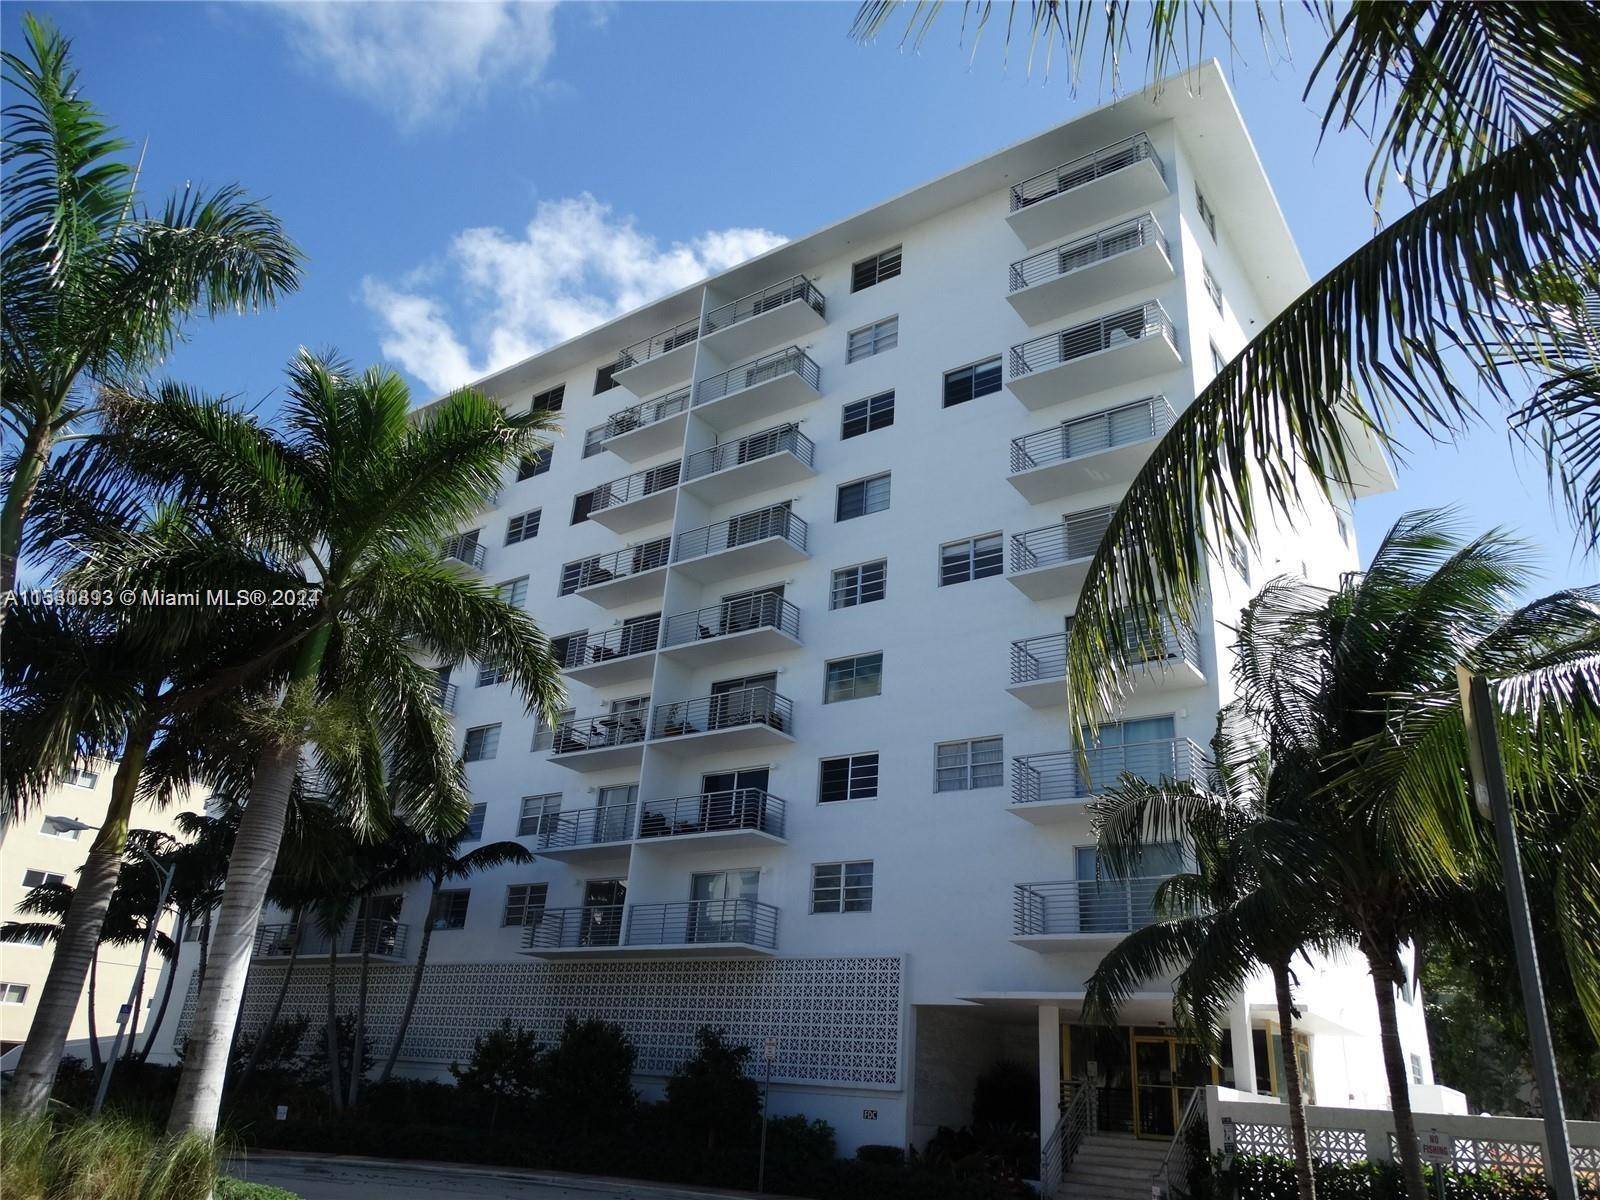 The best location in South Beach, walk to Lincoln Road, shops, restaurants.